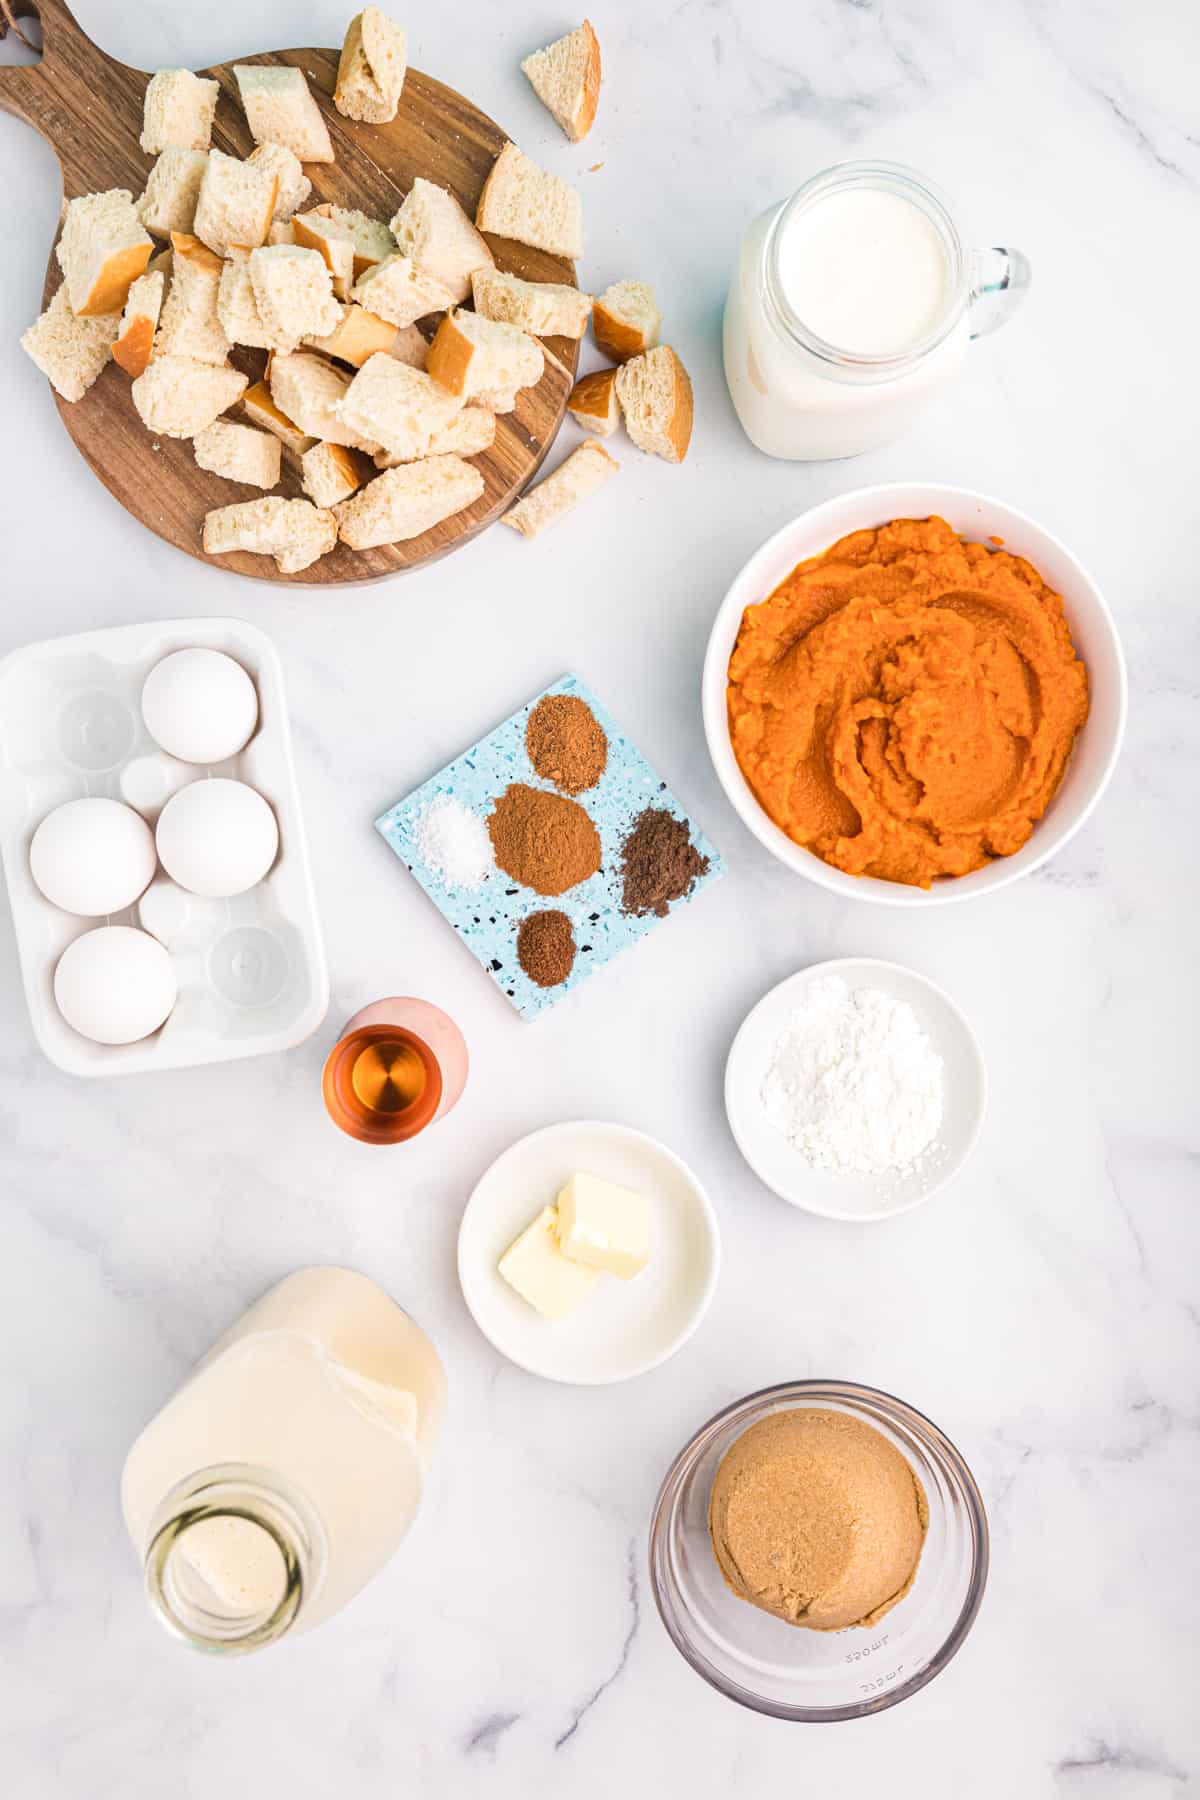 The ingredients for pumpkin bread pudding are placed on a white countertop.